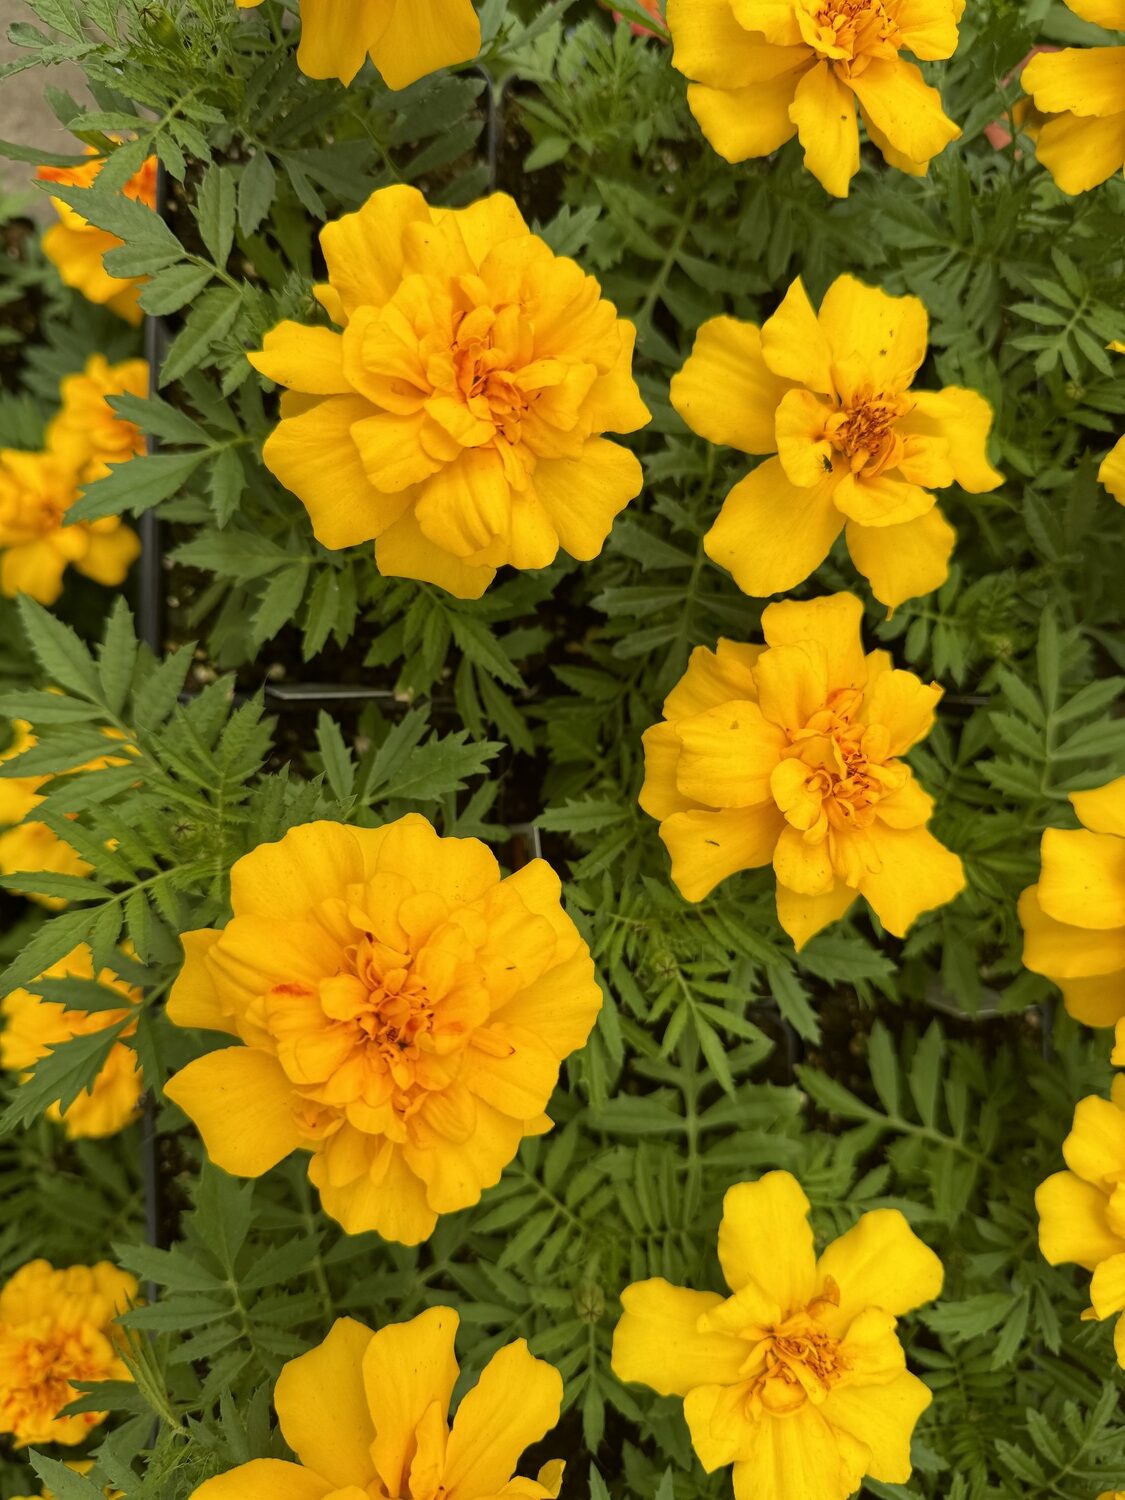 Marigold Endurance Sunset Gold is a triploid marigold with double flowers with a compact French marigold habit. It’s sterile though and not intended as a pollinator.  However, it’s very heat tolerant and long-blooming at 12 to 16 inches tall.
ANDREW MESSINGER